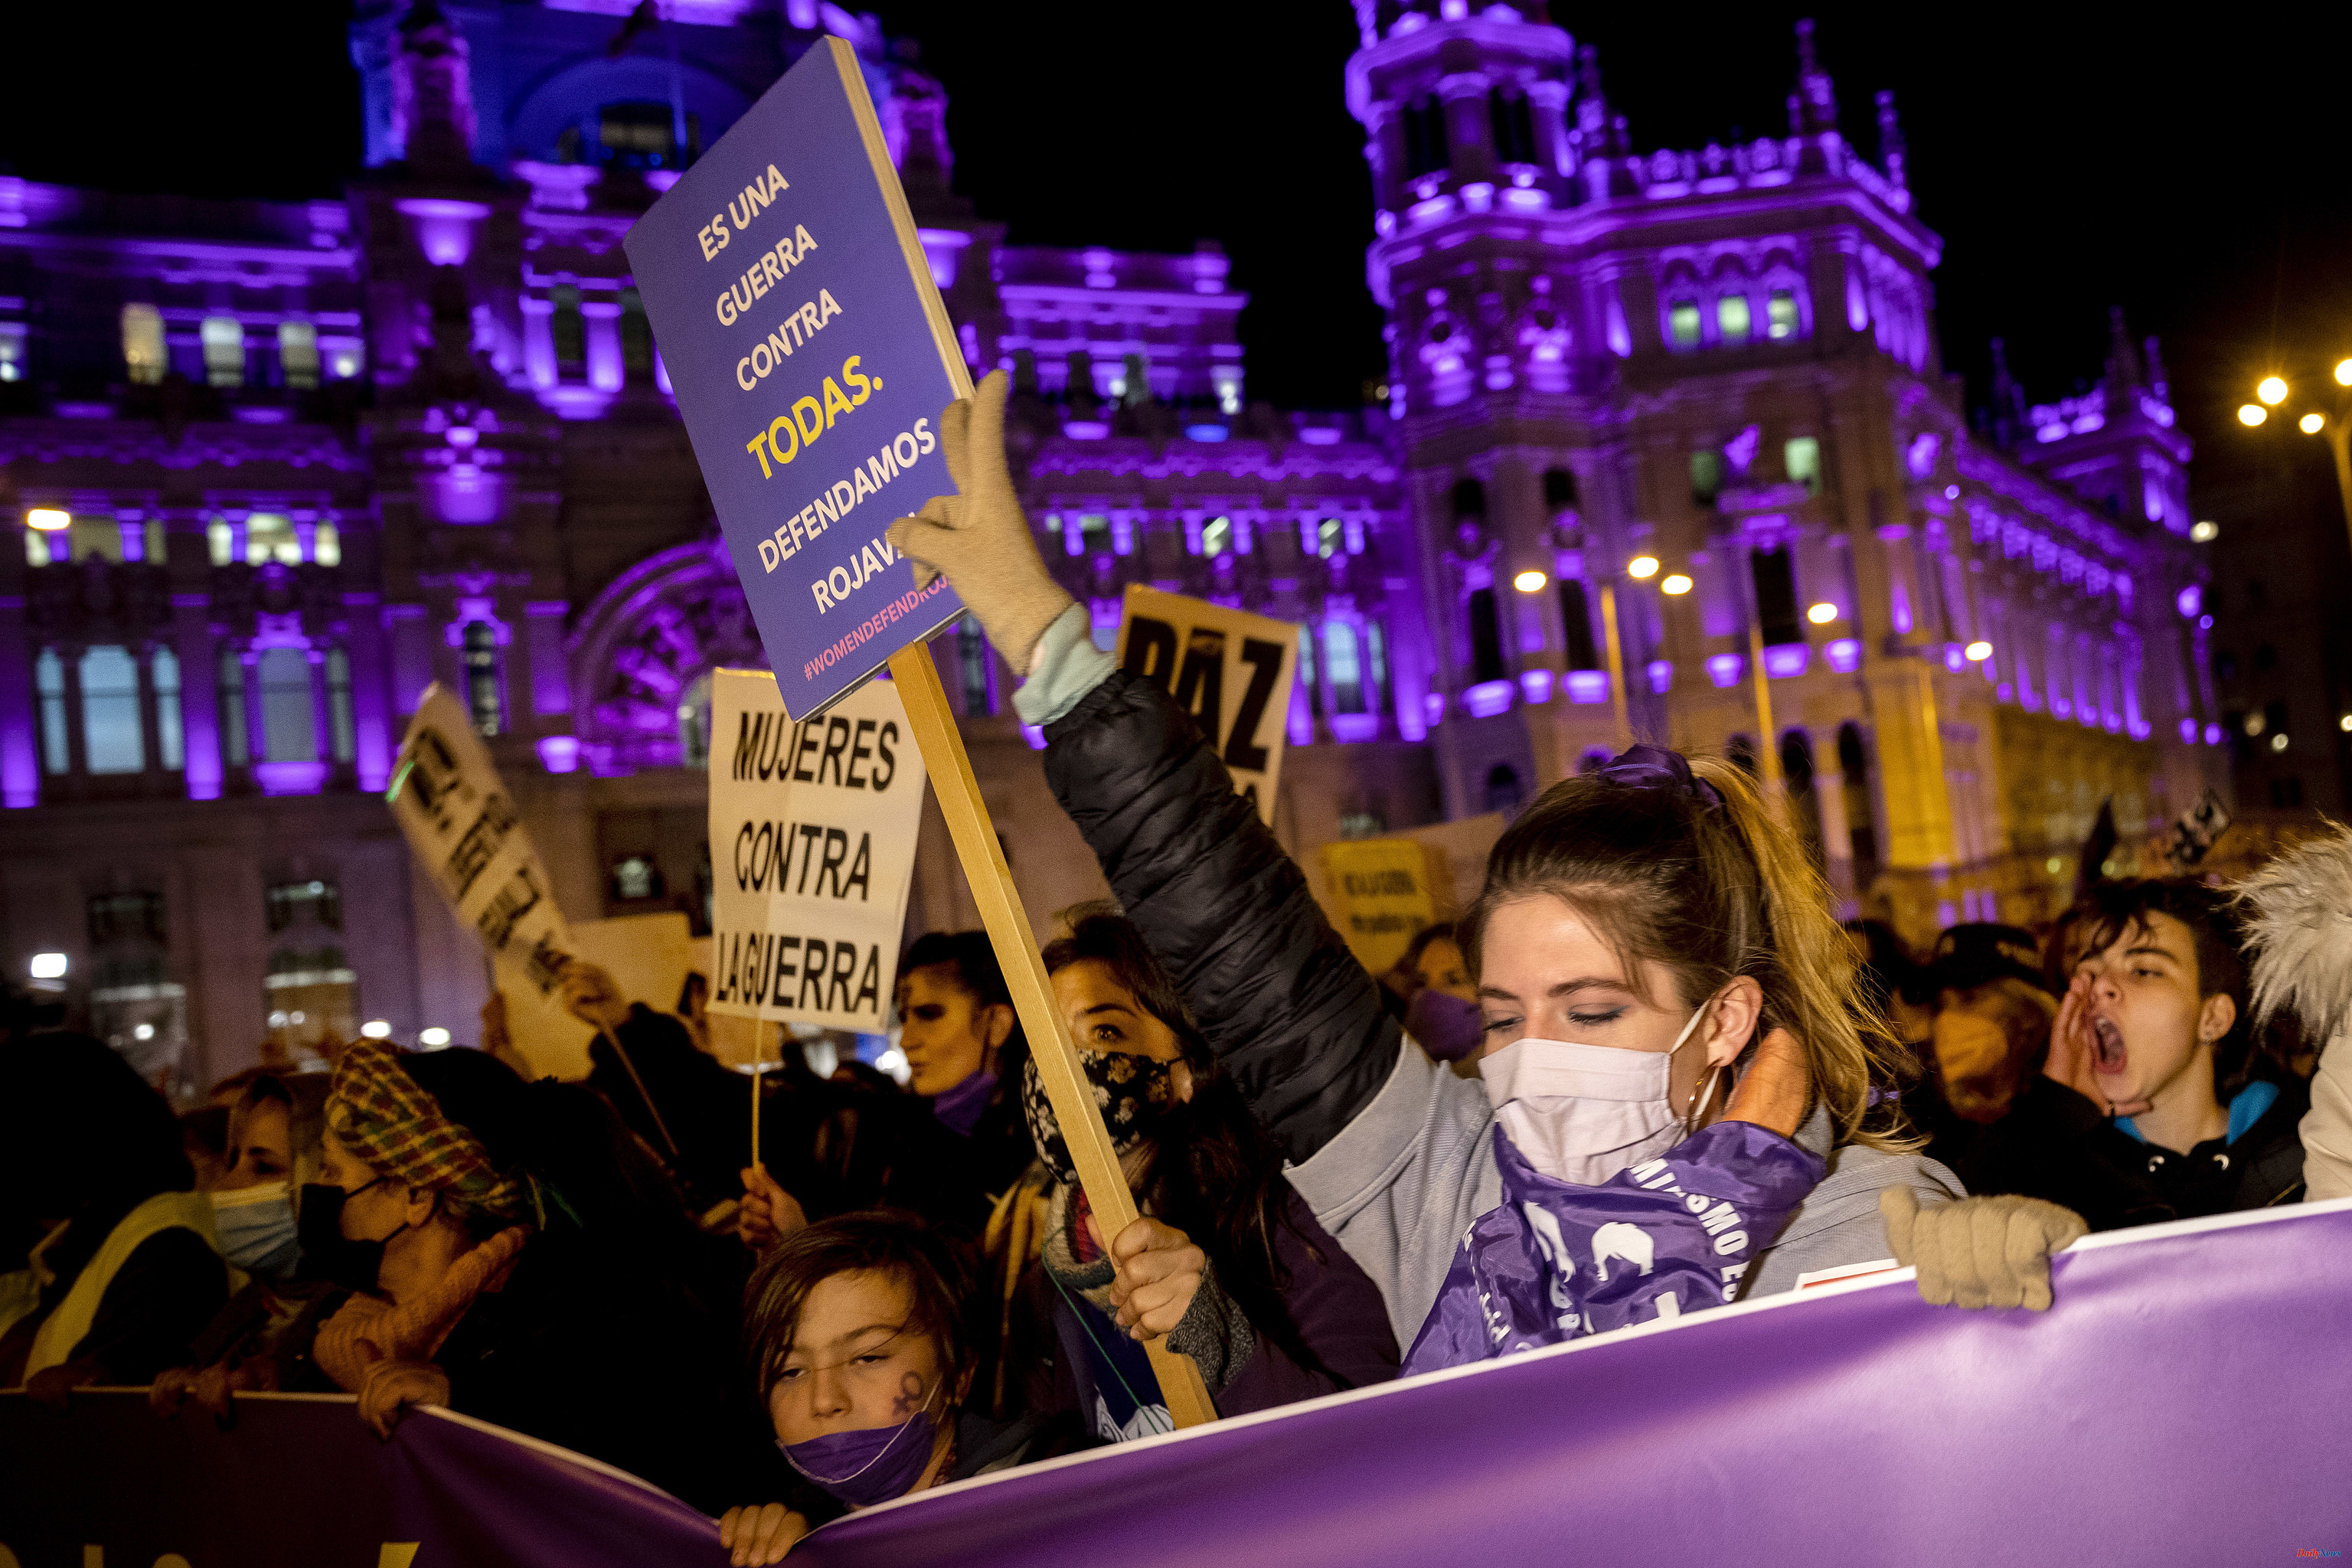 March 8 8M Demonstration in Madrid 2023: Route and schedule of the two main marches